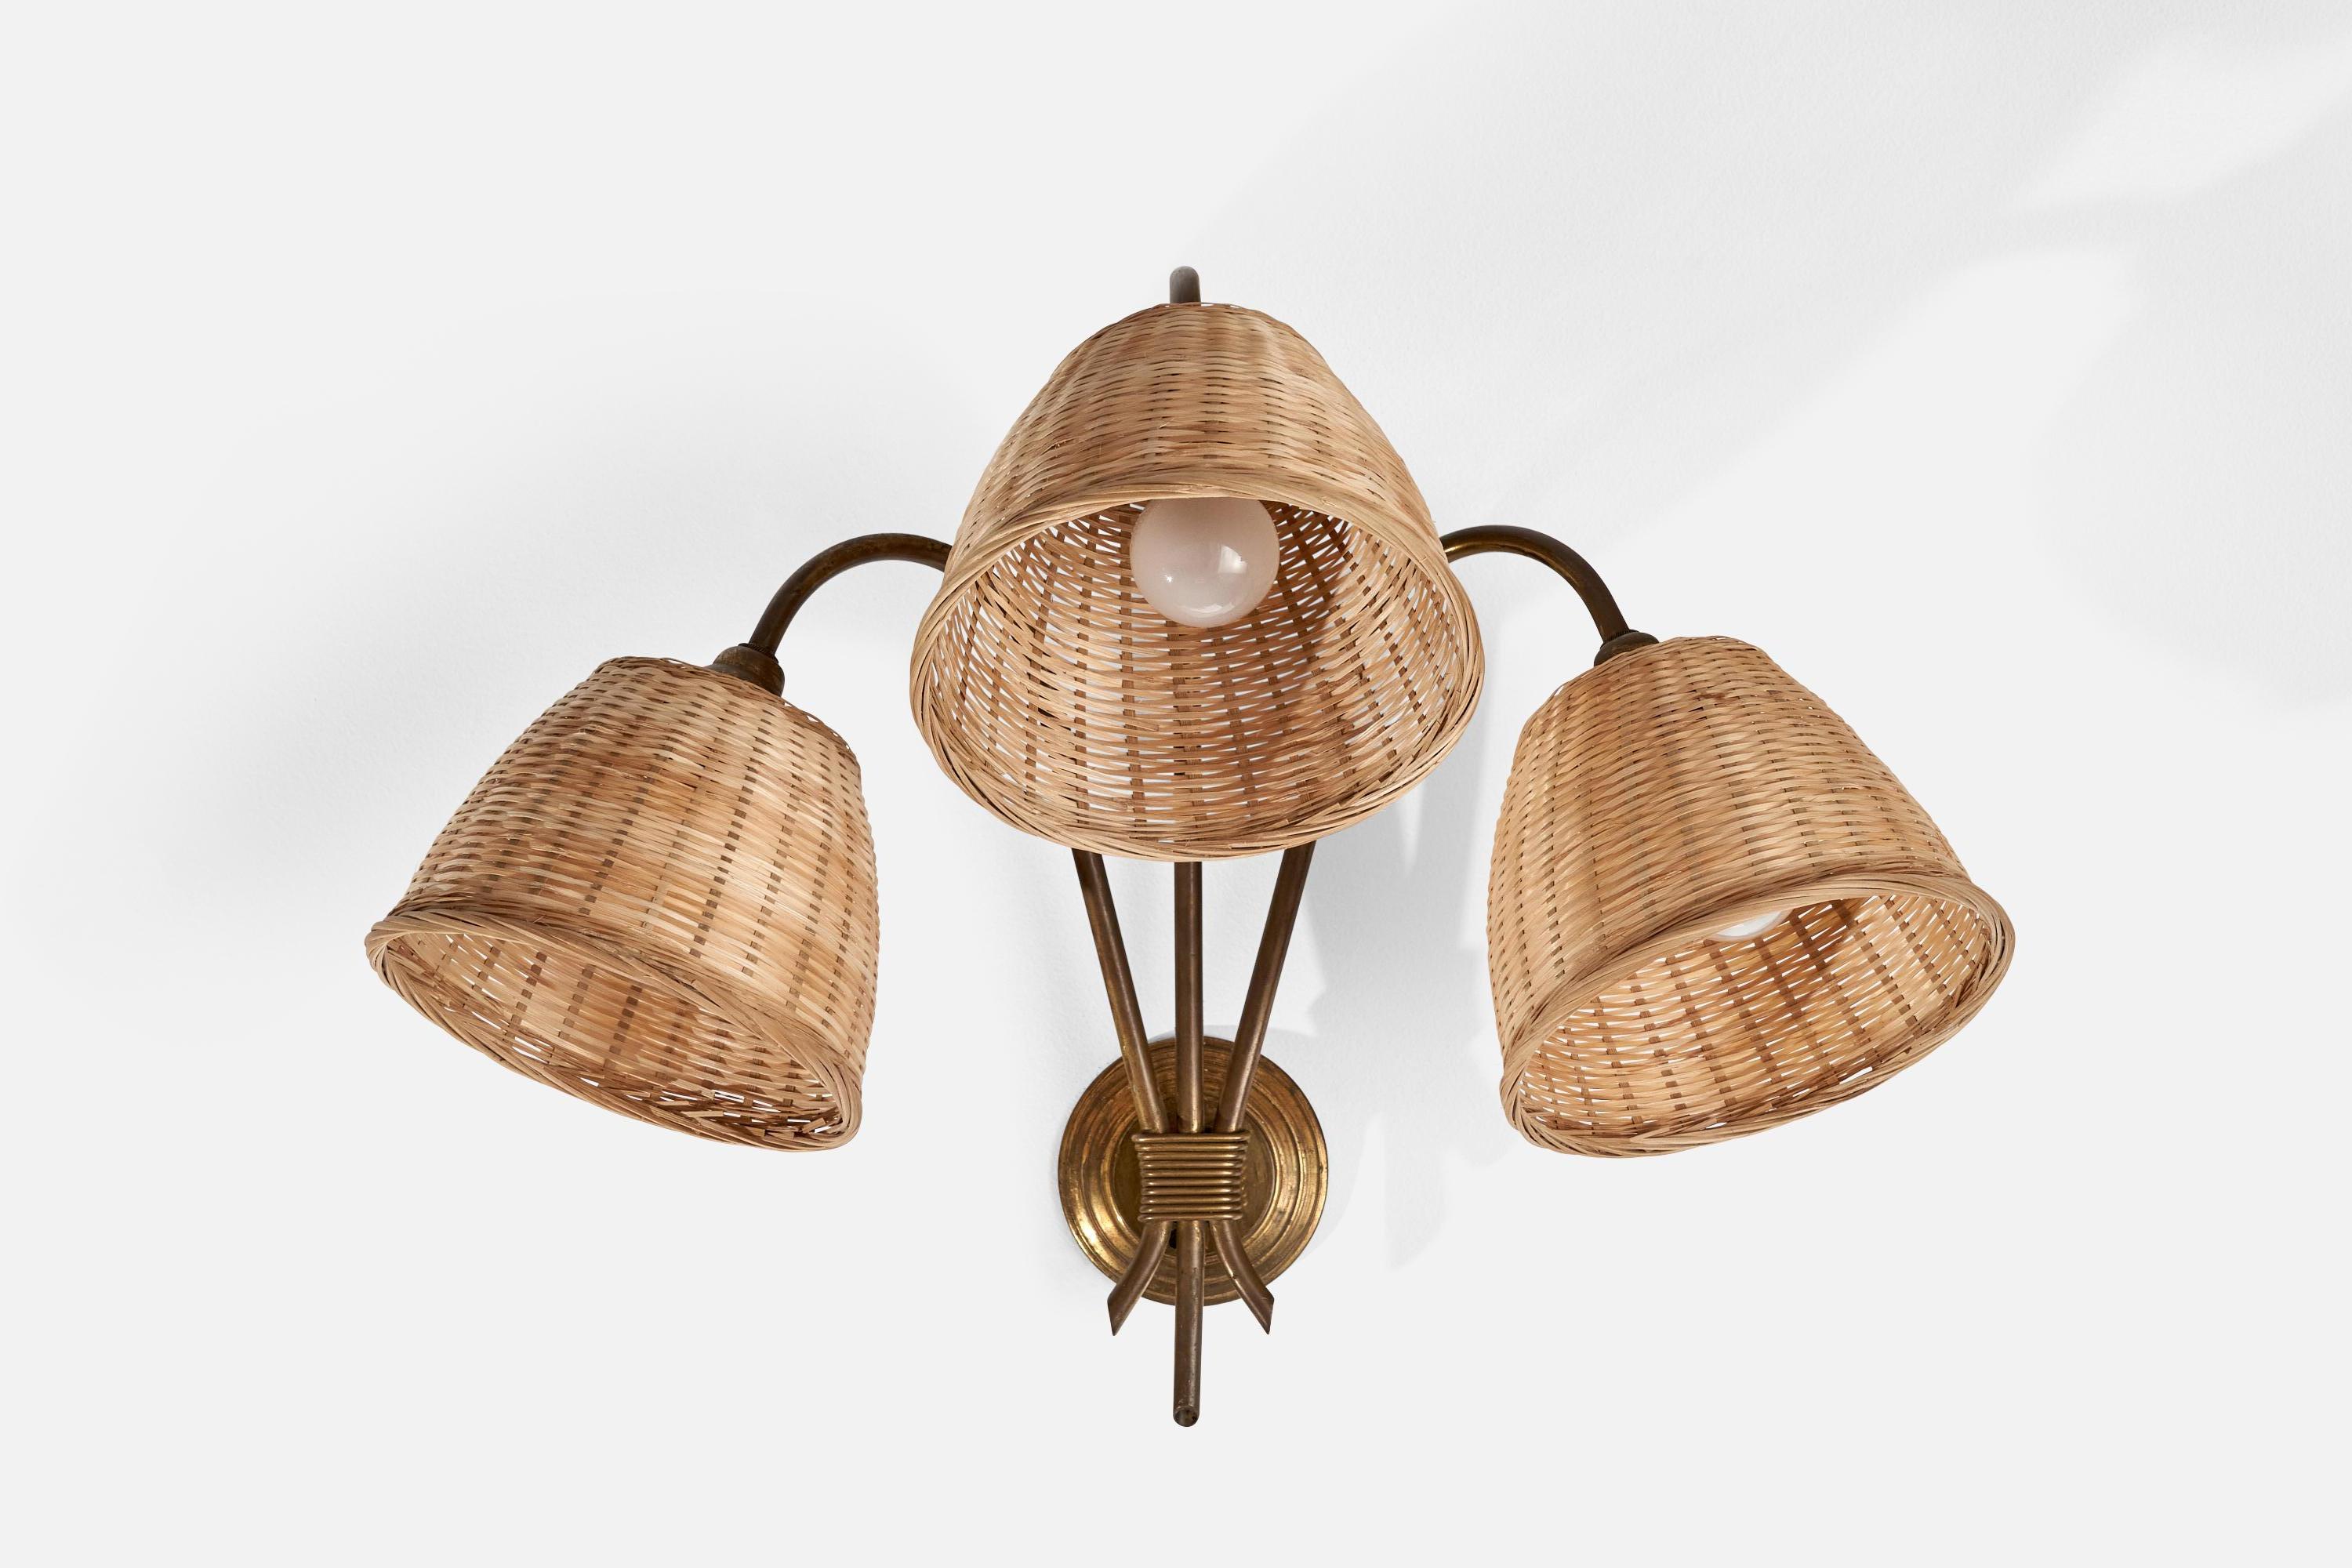 A three-armed brass and rattan wall light designed and produced in France, 1940s.

Overall Dimensions (inches): 16” H x 21” W x 17.75” D
Back Plate Dimensions (inches): 3.75” H x.50” D
Bulb Specifications: E-12 Bulb
Number of Sockets: 3
All lighting